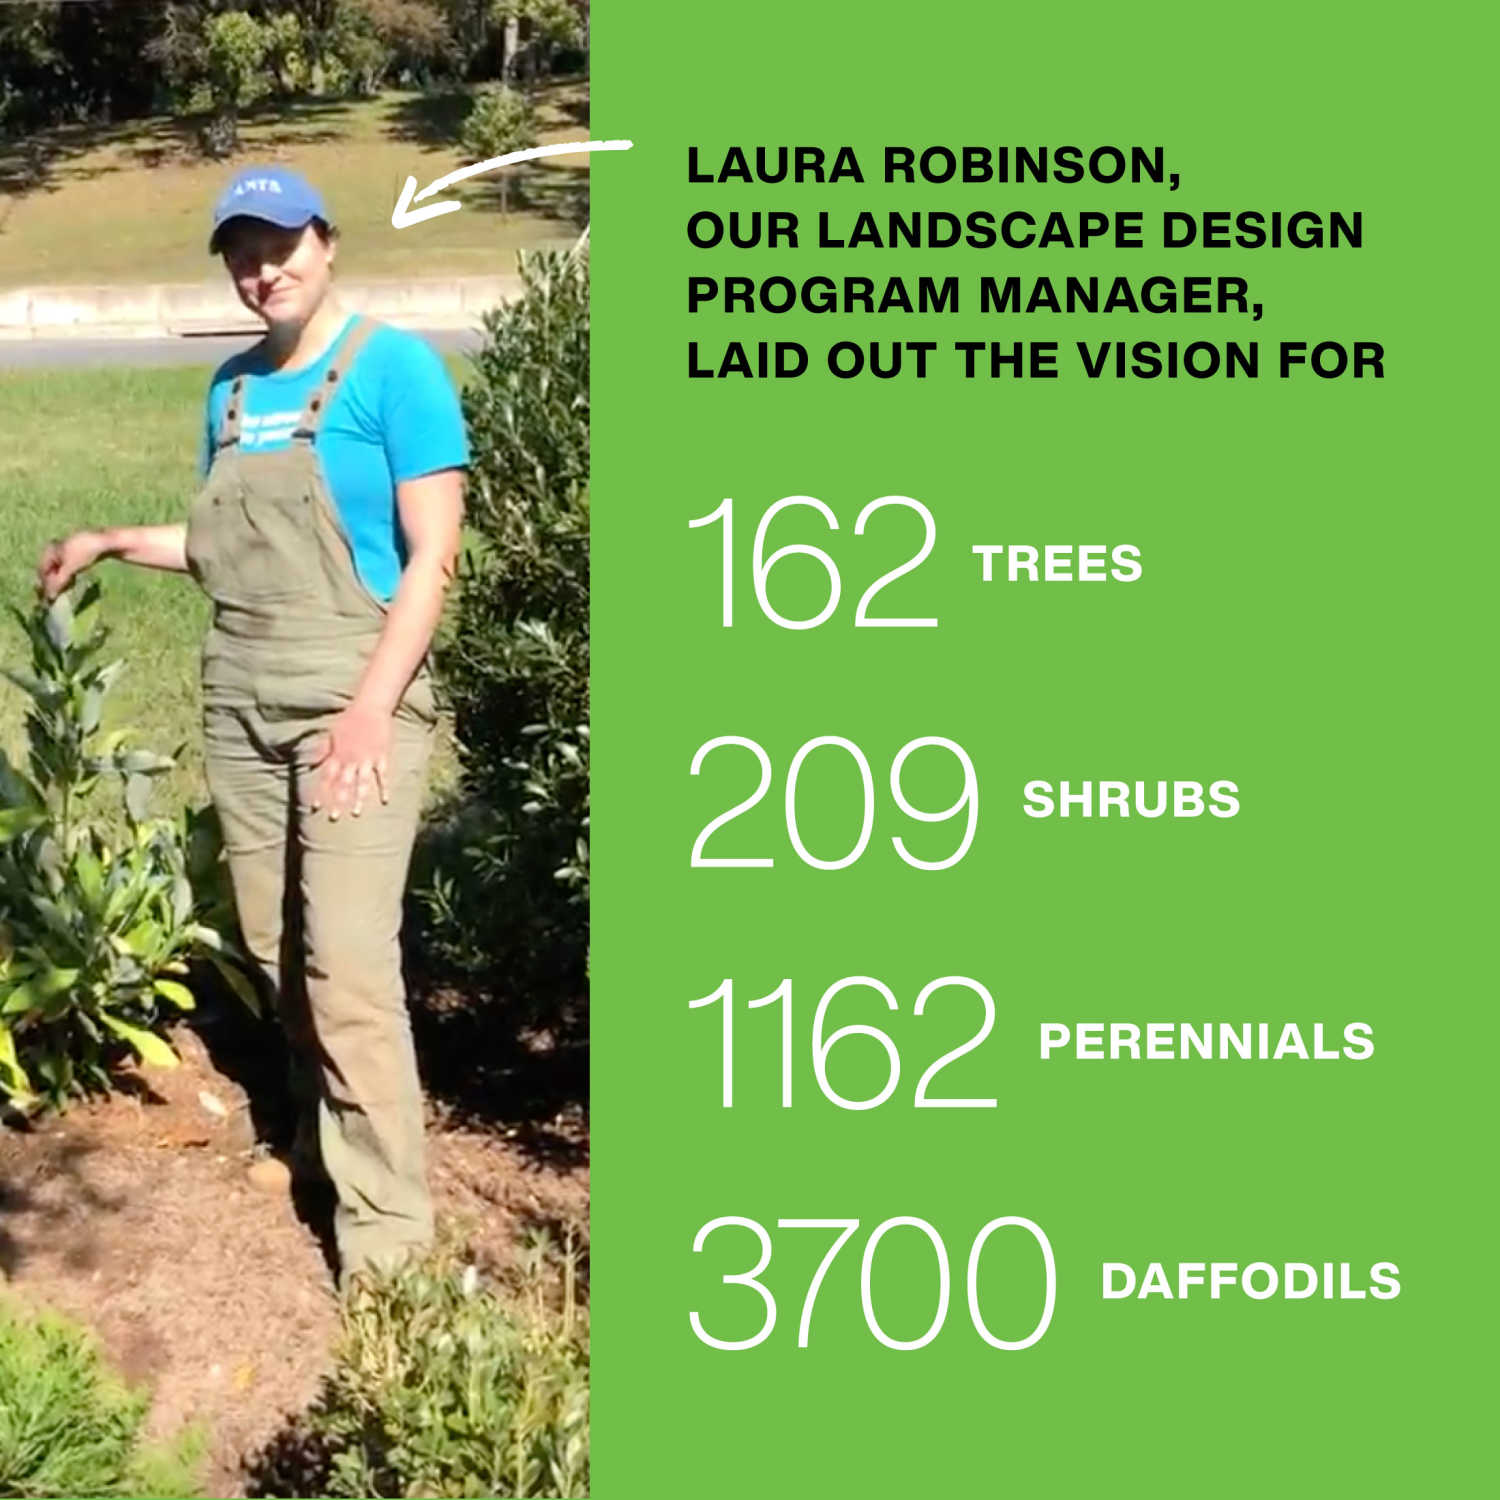 Laura Robinson, our Landscape Design Program Manager, laid out the vision for 162 trees, 209 shrubs, and more.